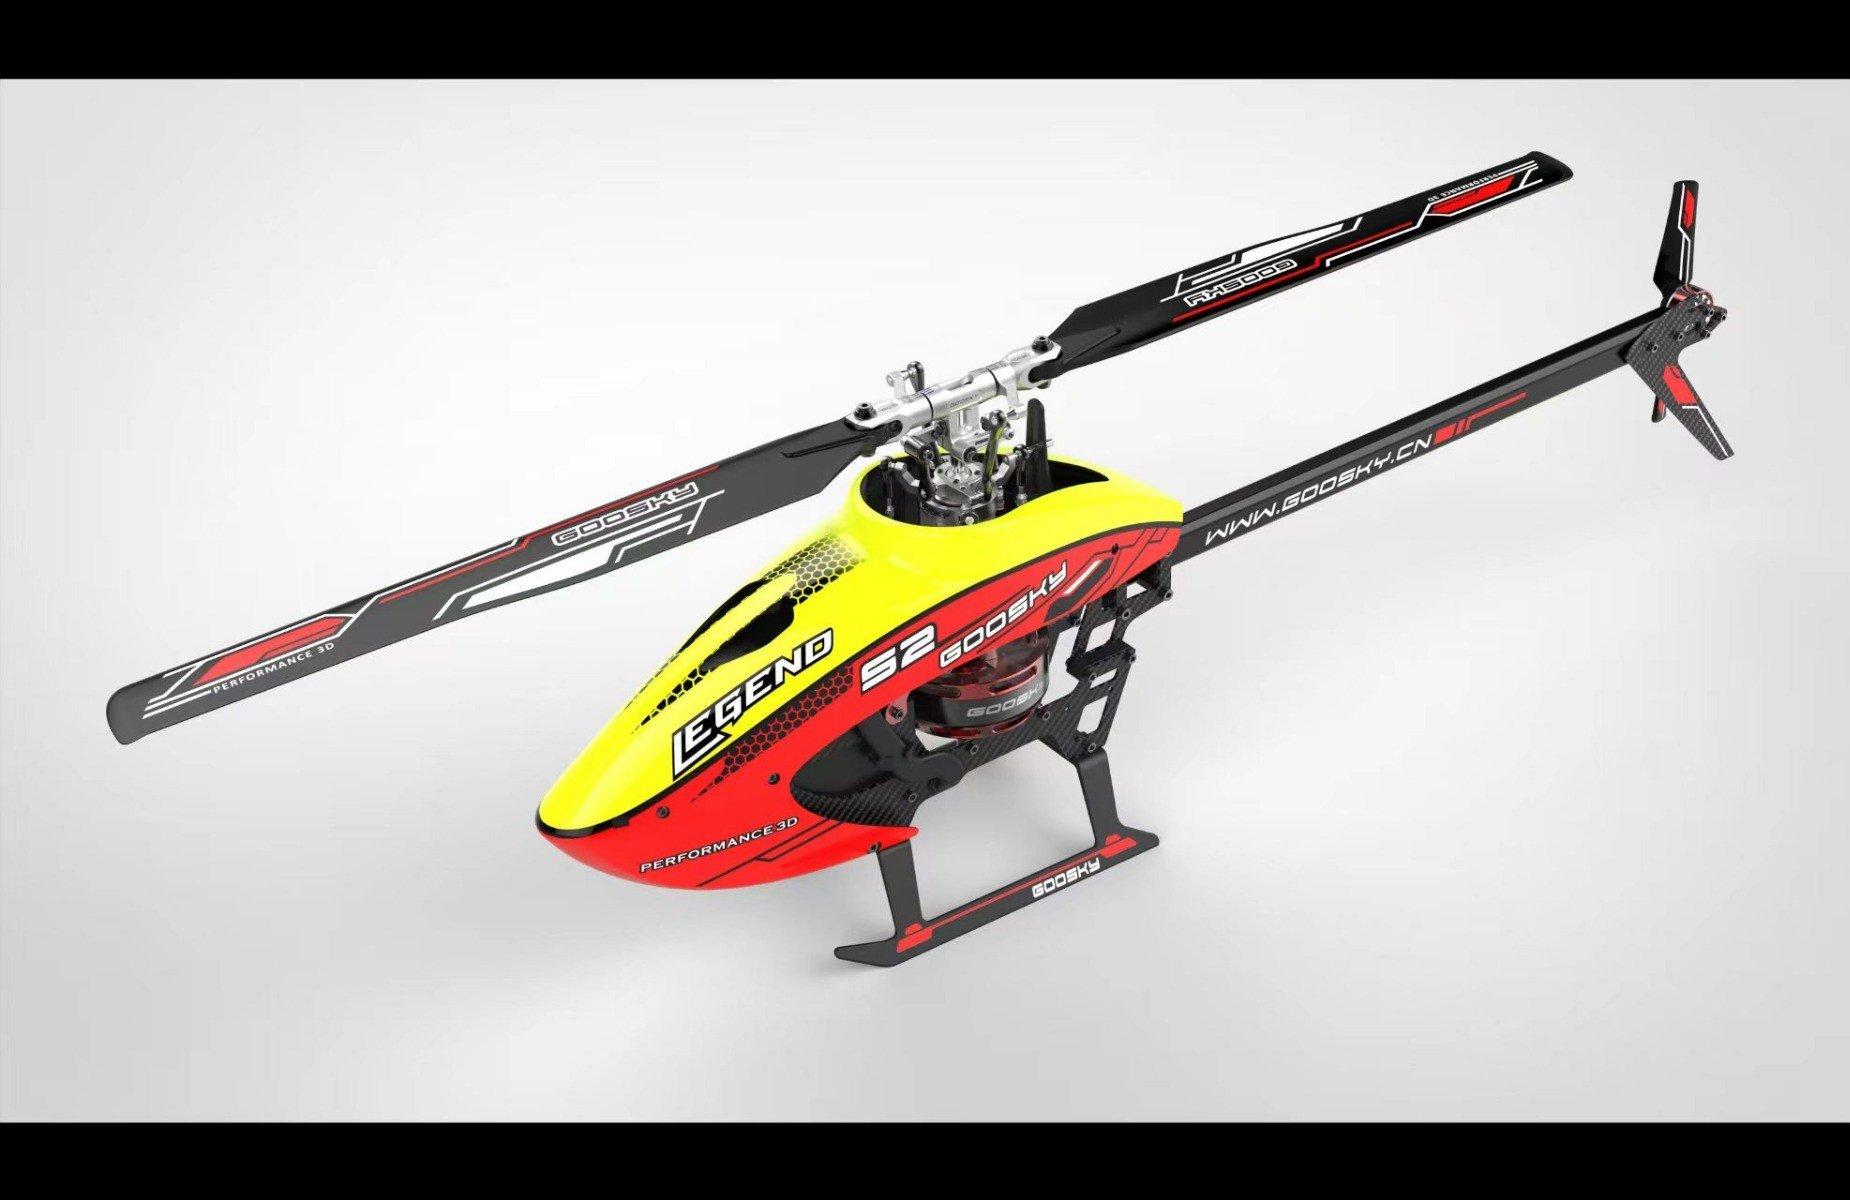 Ec Hobby Helicopter: Choosing the Right Ec Hobby Helicopter - Tips and Brands